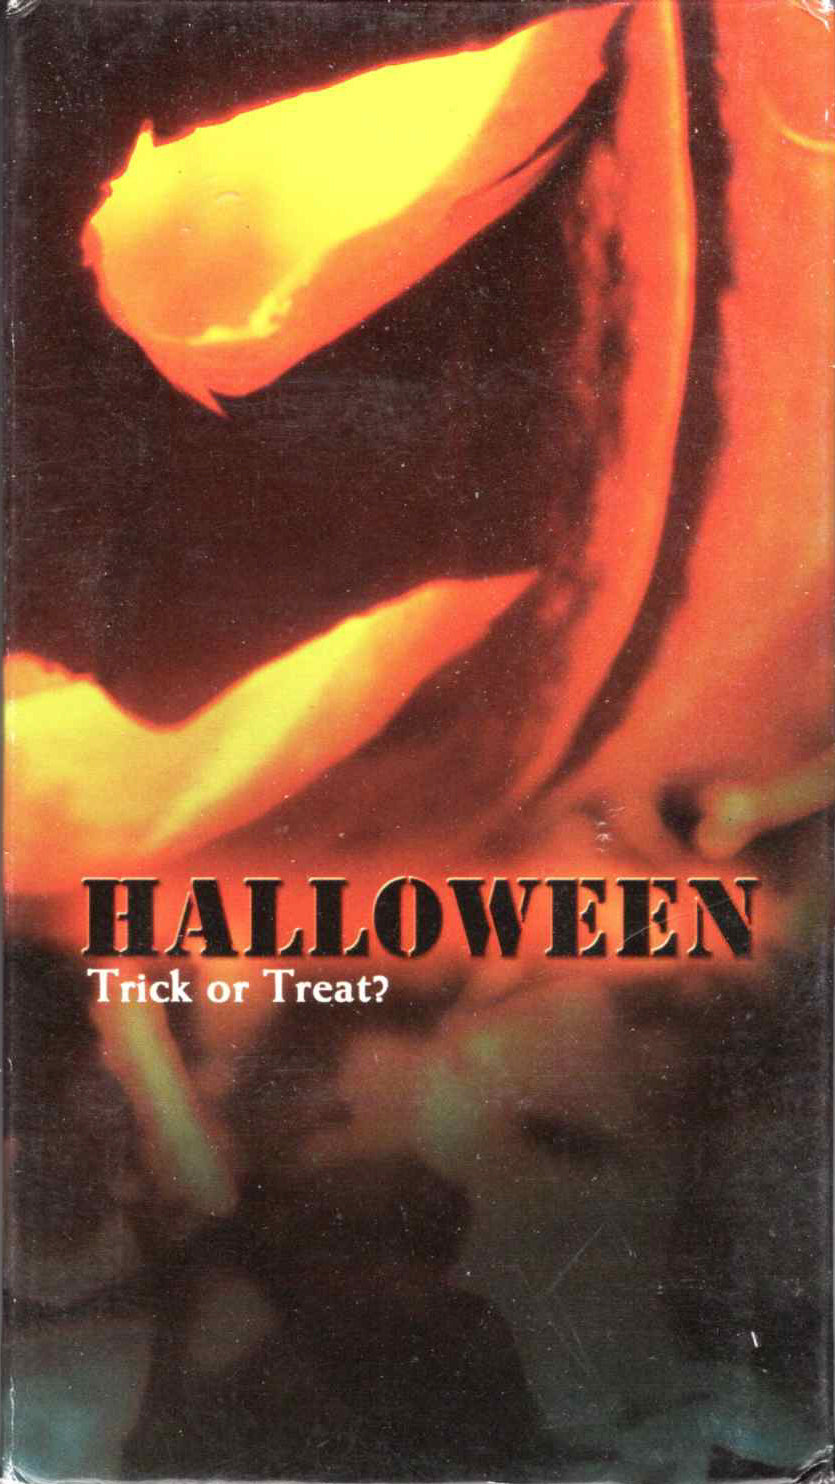 Halloween: Trick or Treat? VHS (1991)